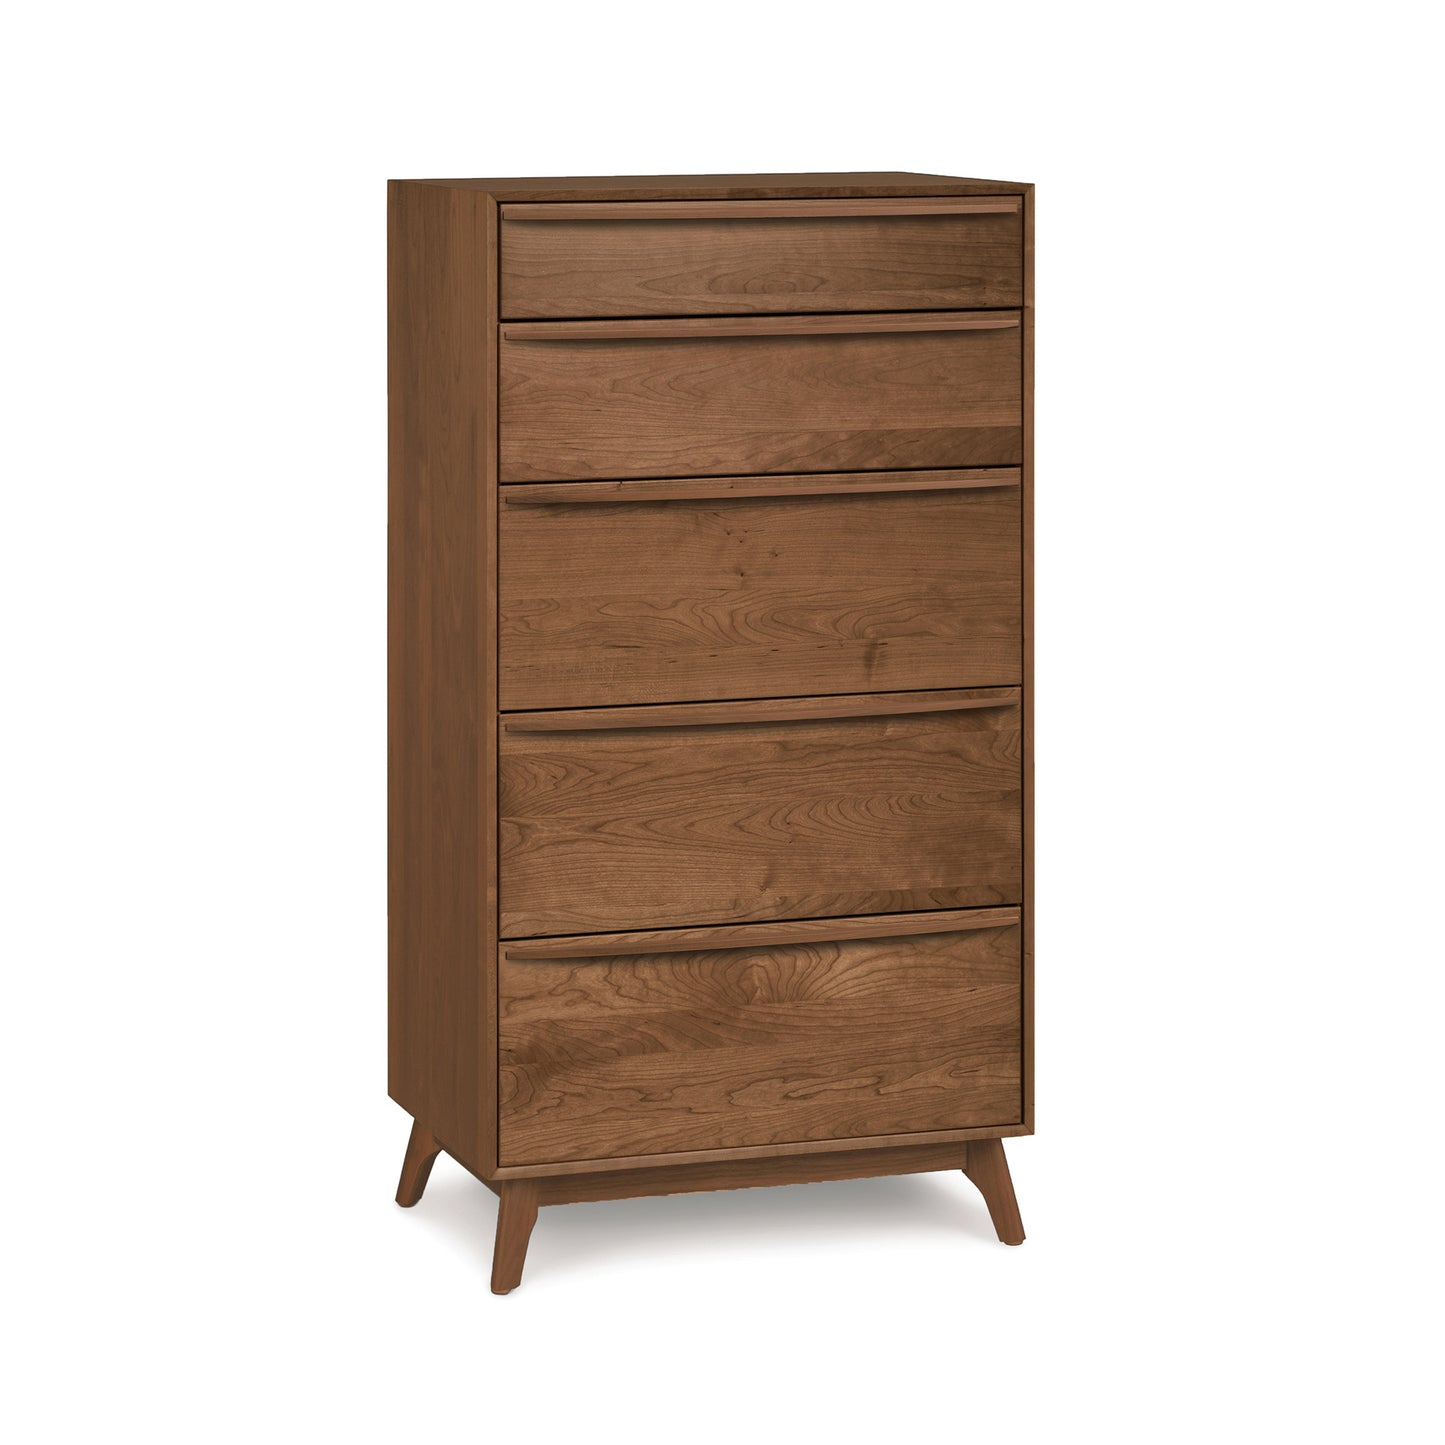 The Copeland Furniture Catalina 5-Drawer Chest is a stunning piece of bedroom furniture crafted with solid wood construction in a rich, dark brown color.